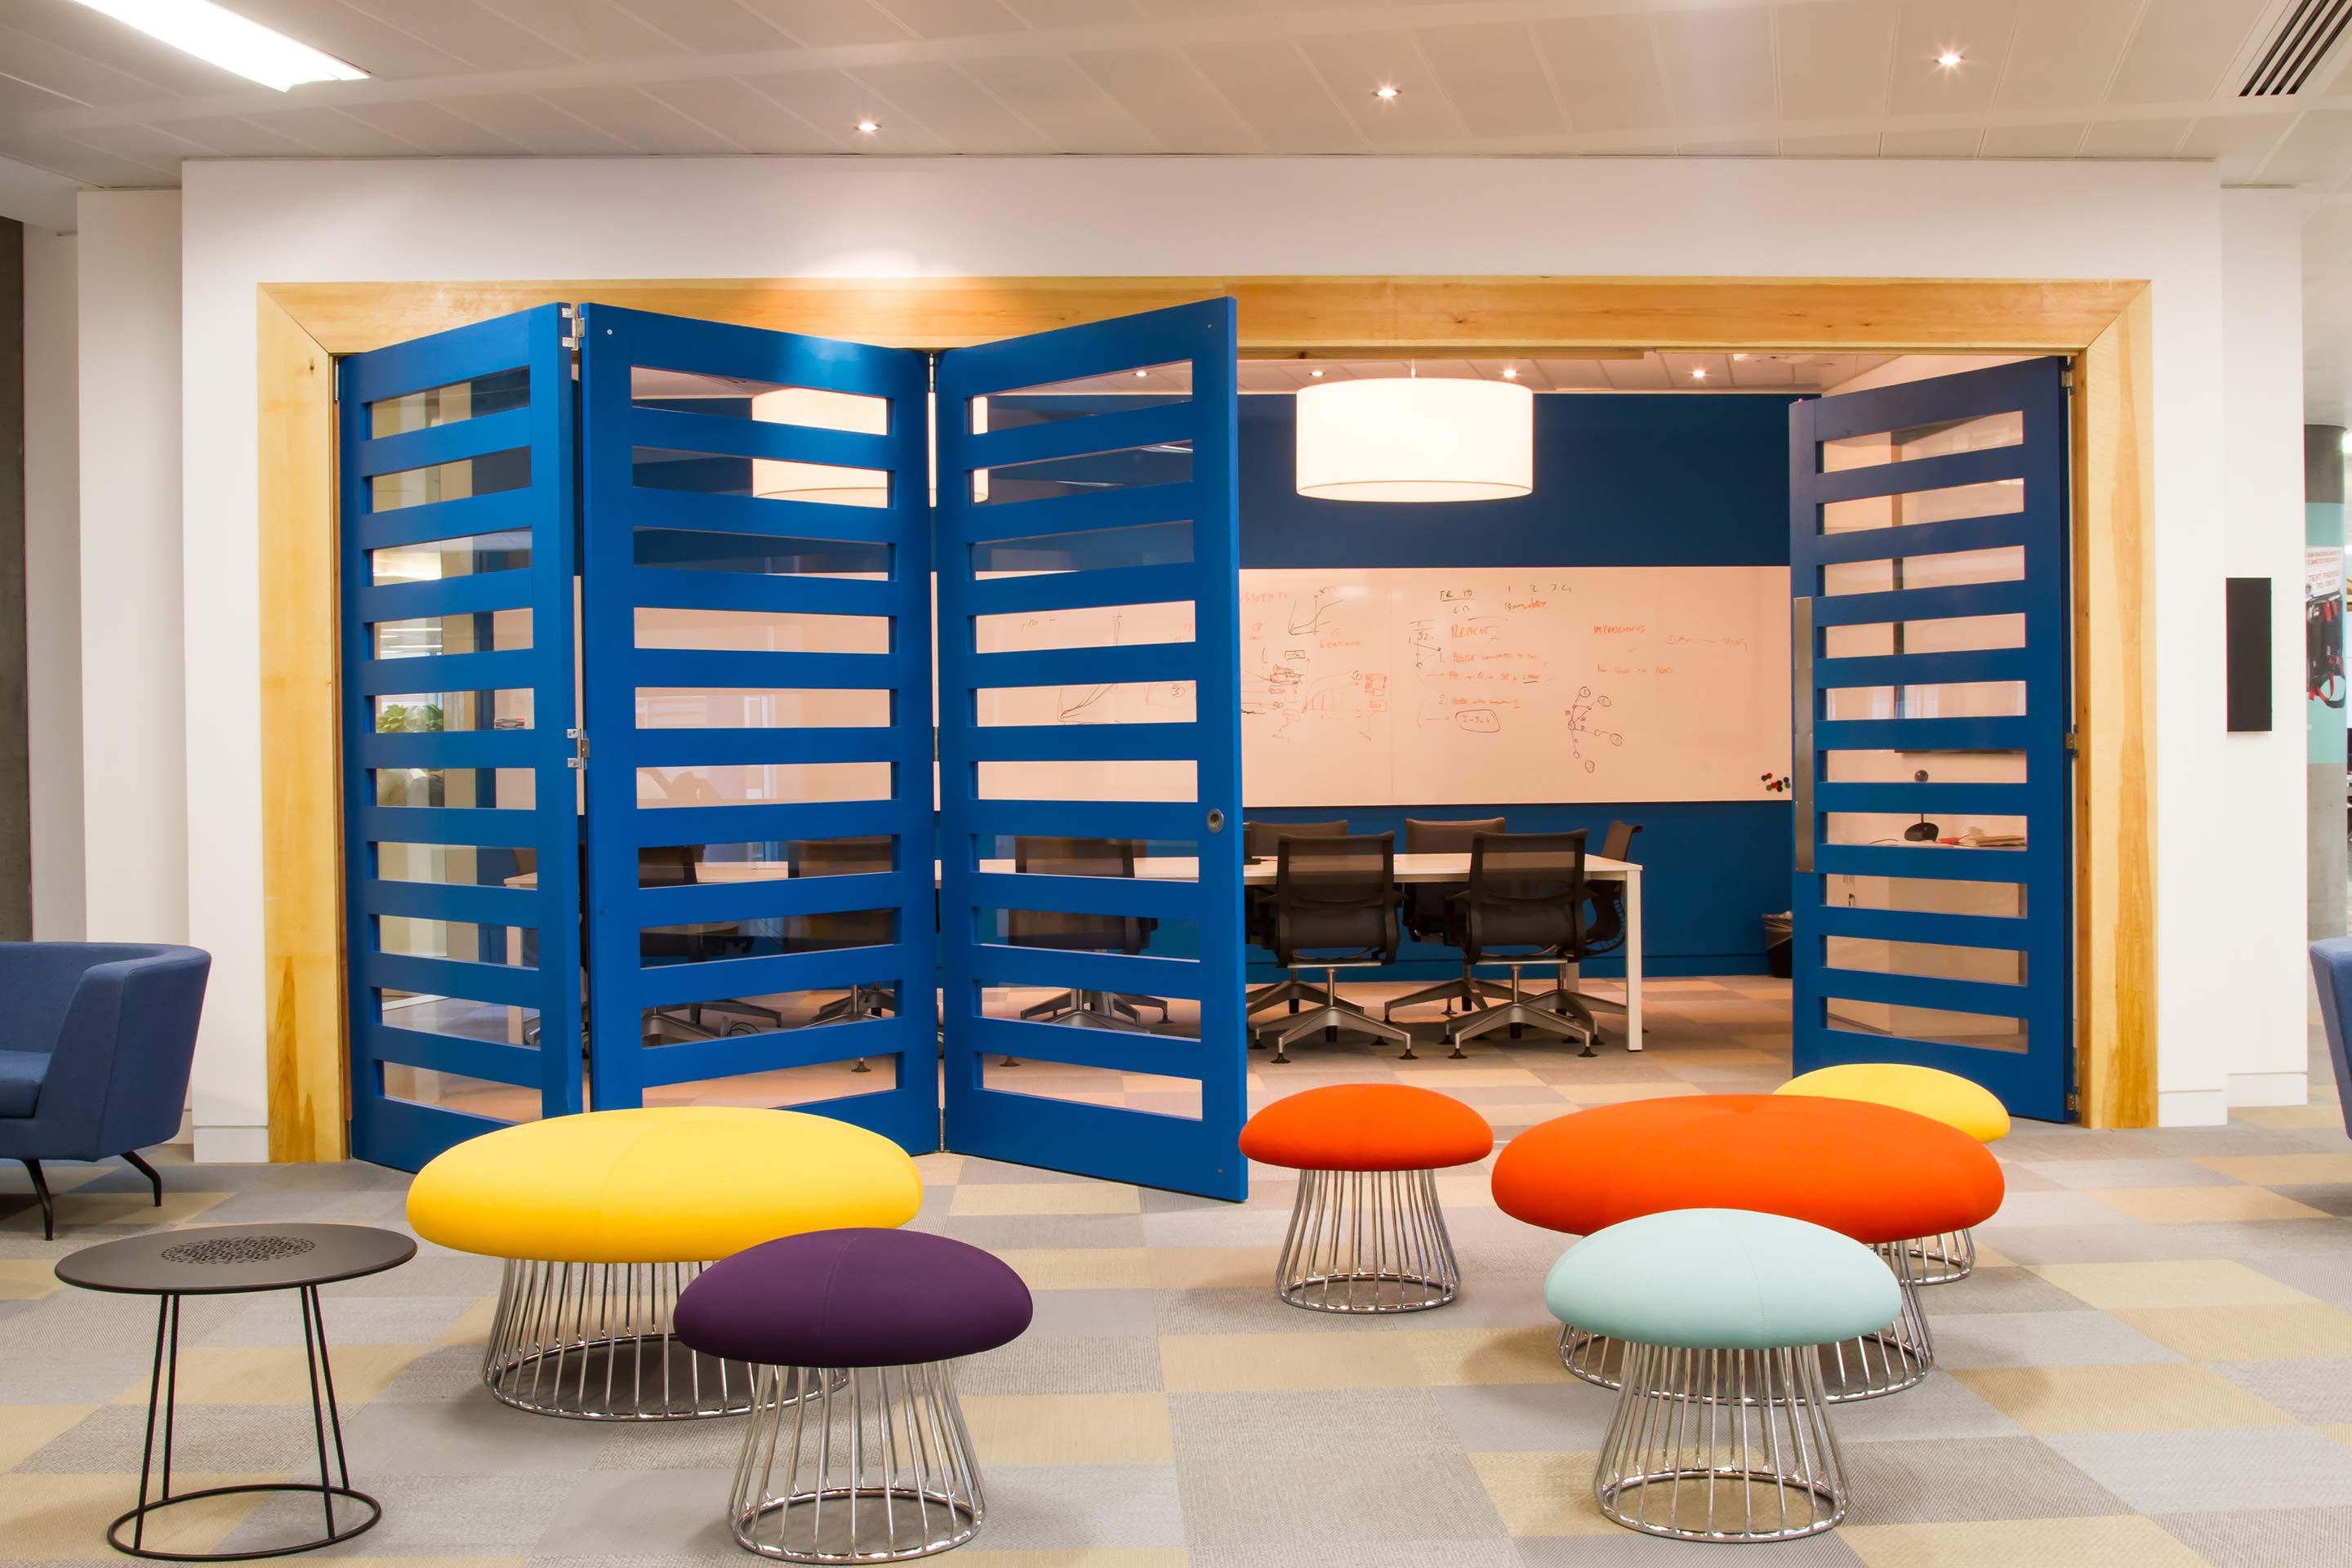 Breakout areas and a meeting room with a folding door